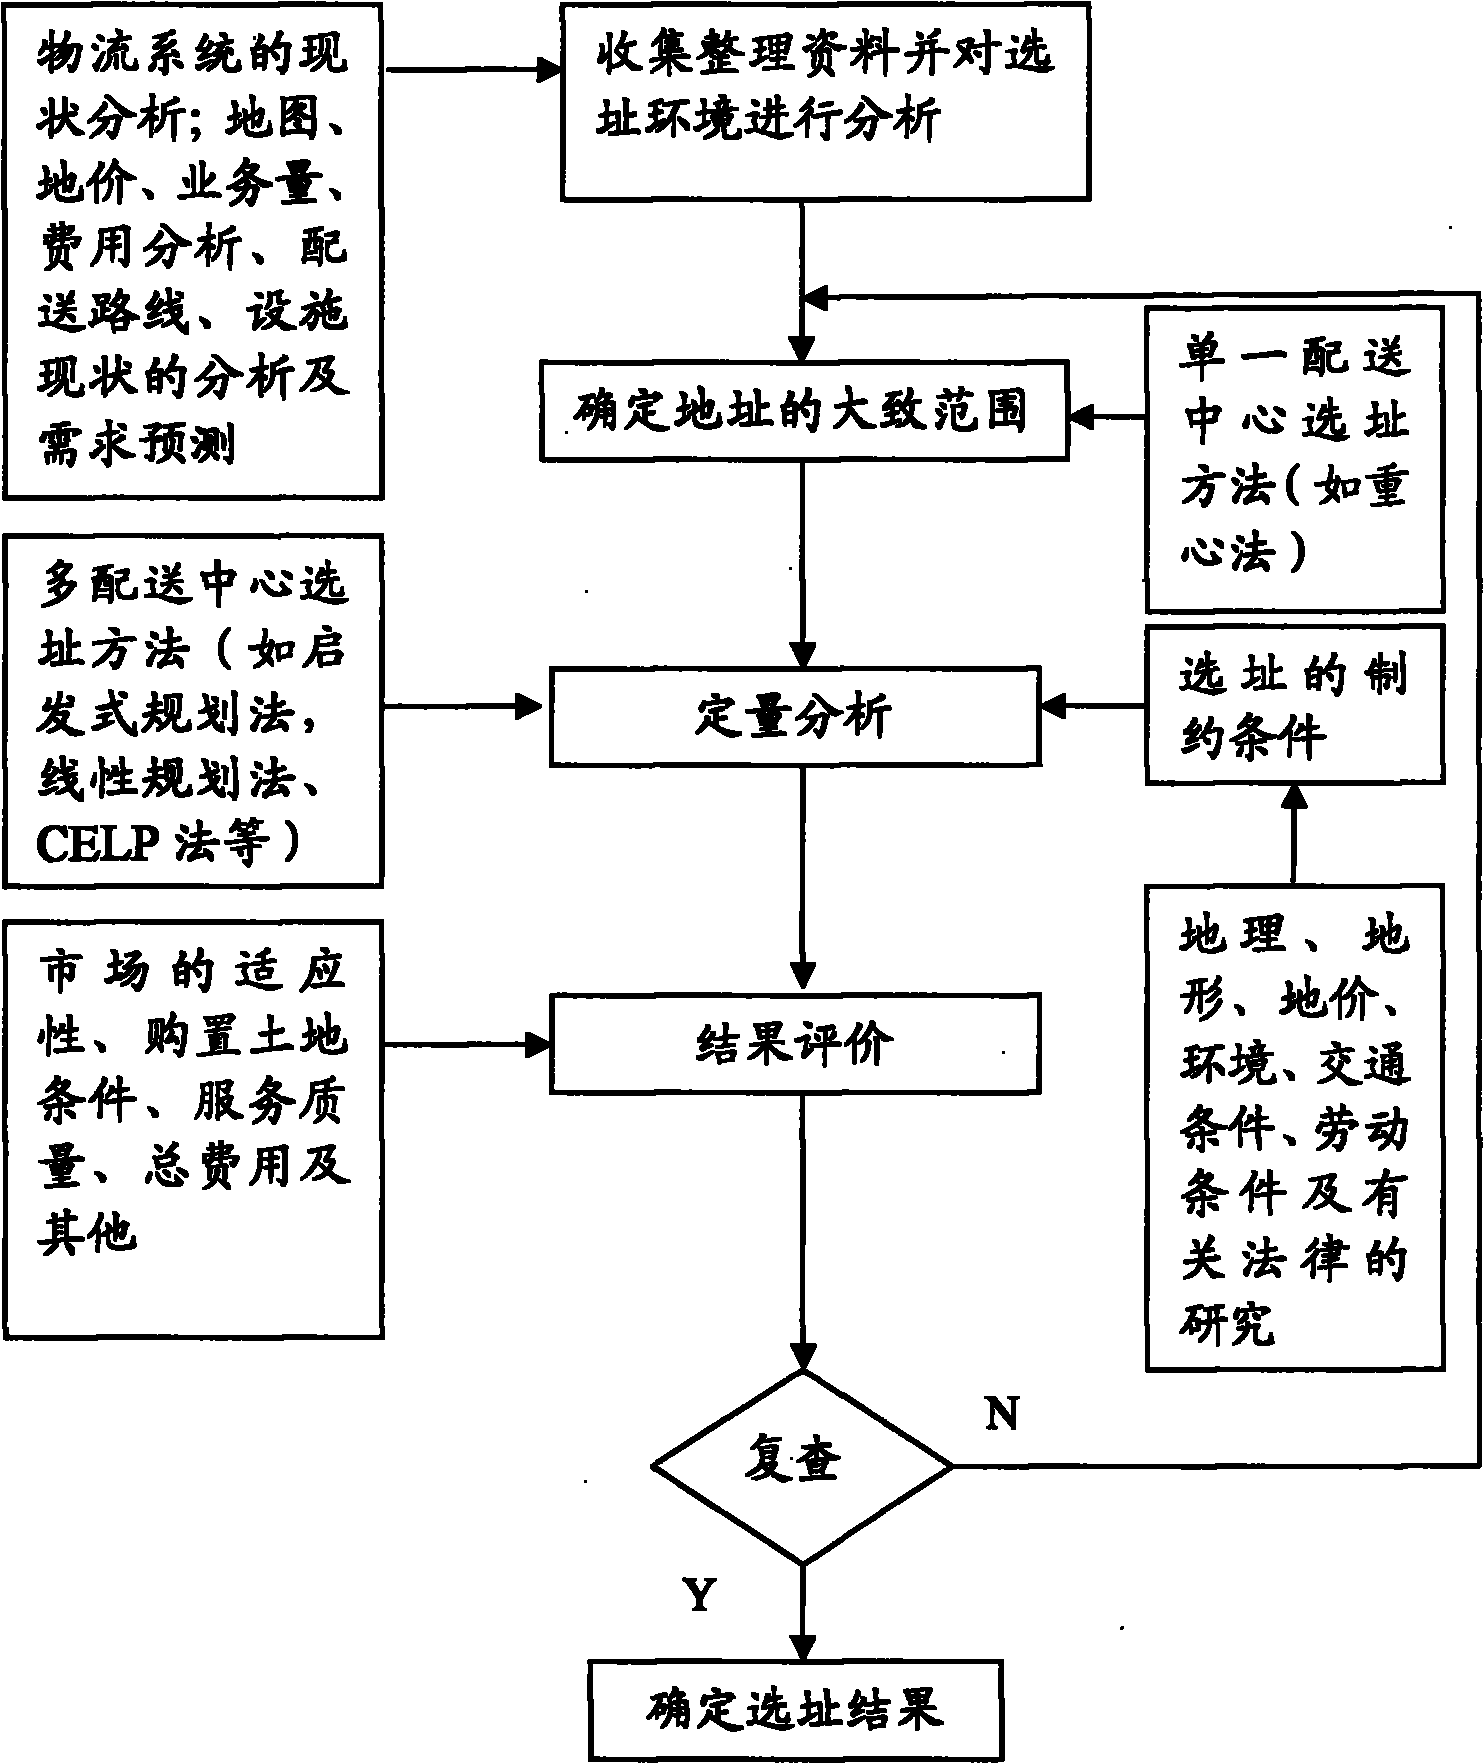 Optimization method of agricultural material chain operation logistics center site selection